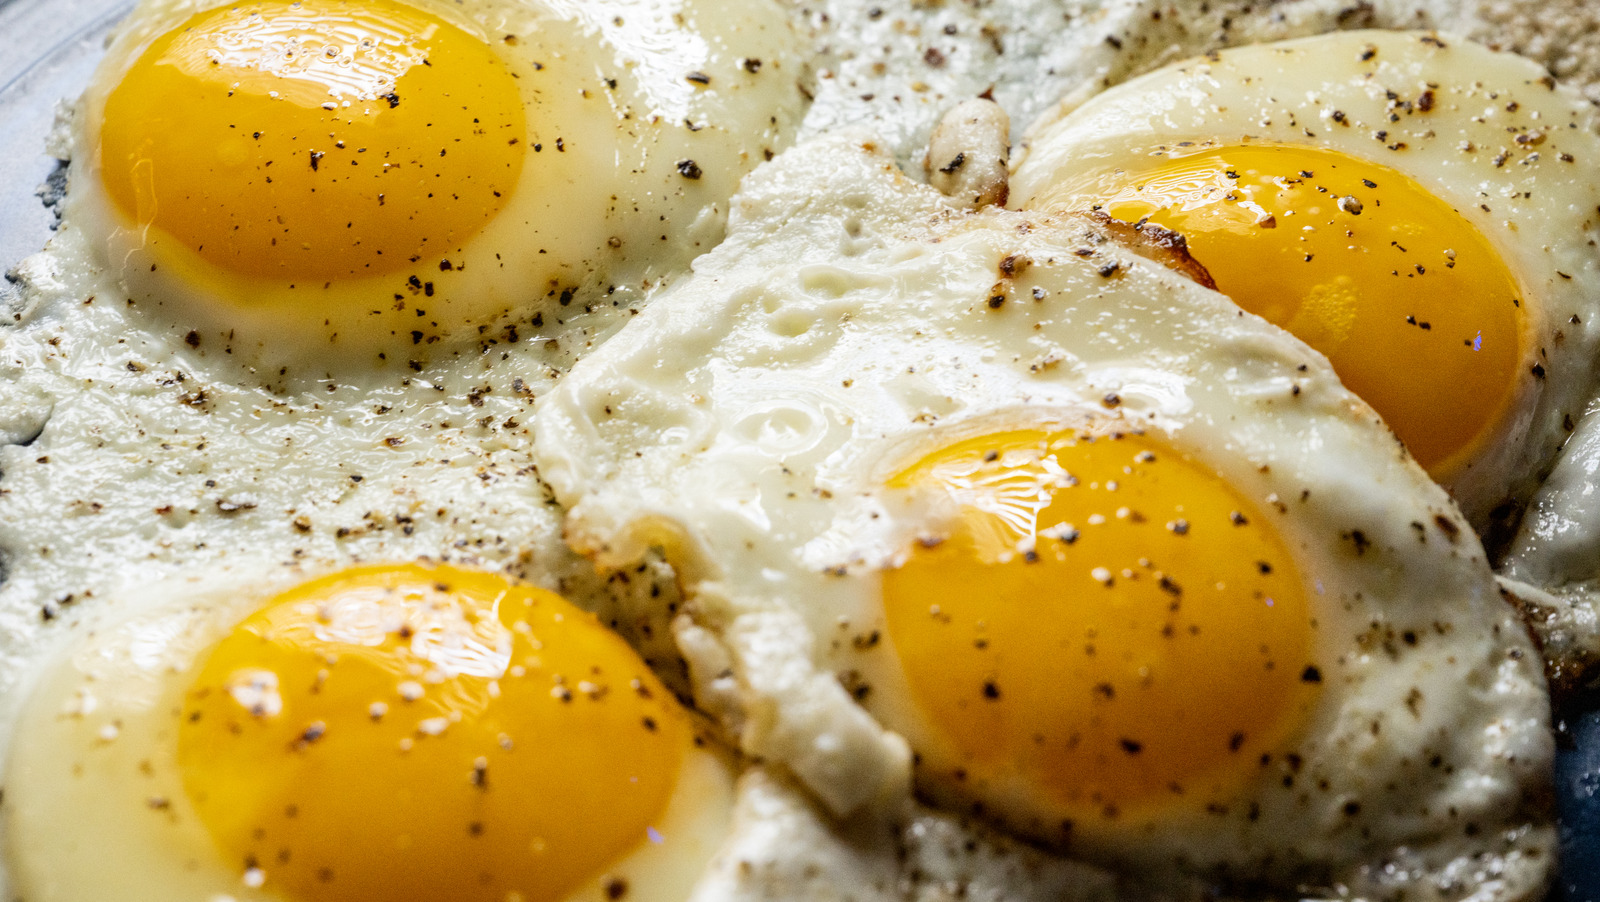 https://www.thedailymeal.com/img/gallery/the-parchment-paper-tip-thatll-give-you-mess-free-eggs-every-time/l-intro-1682700336.jpg